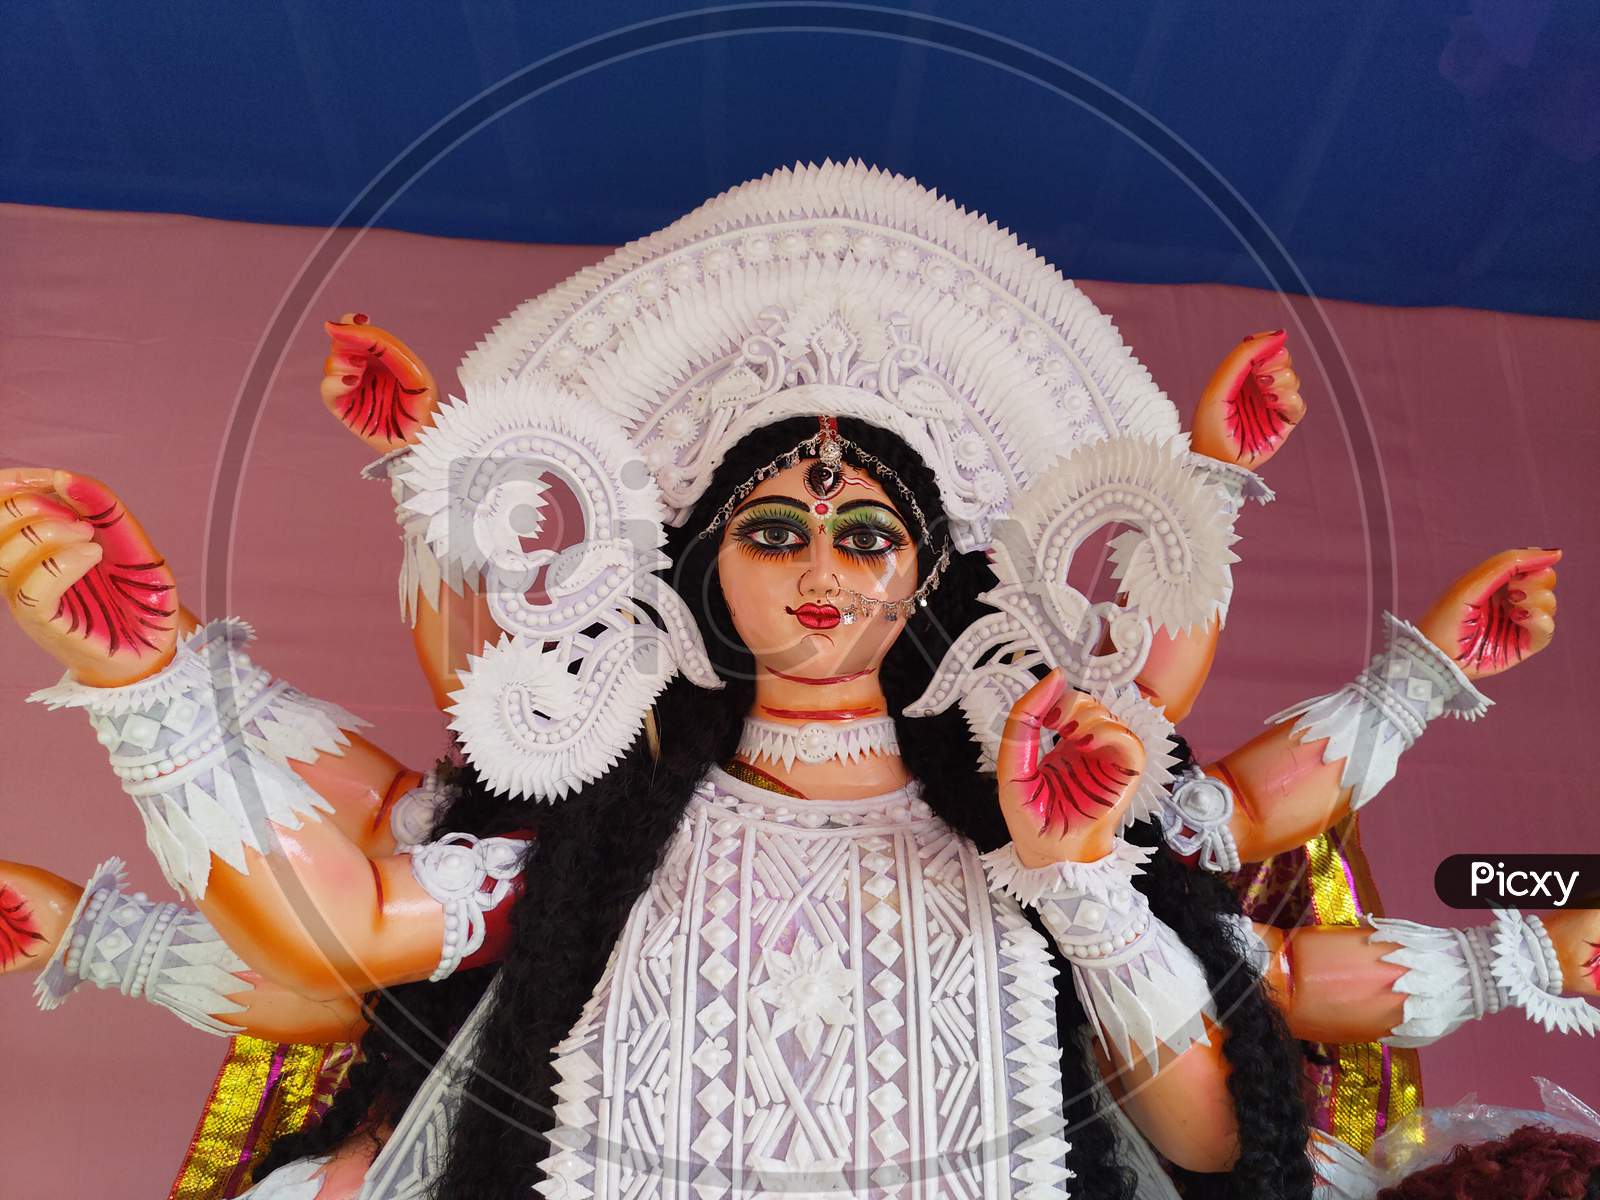 Picture of the face of the durga idol.